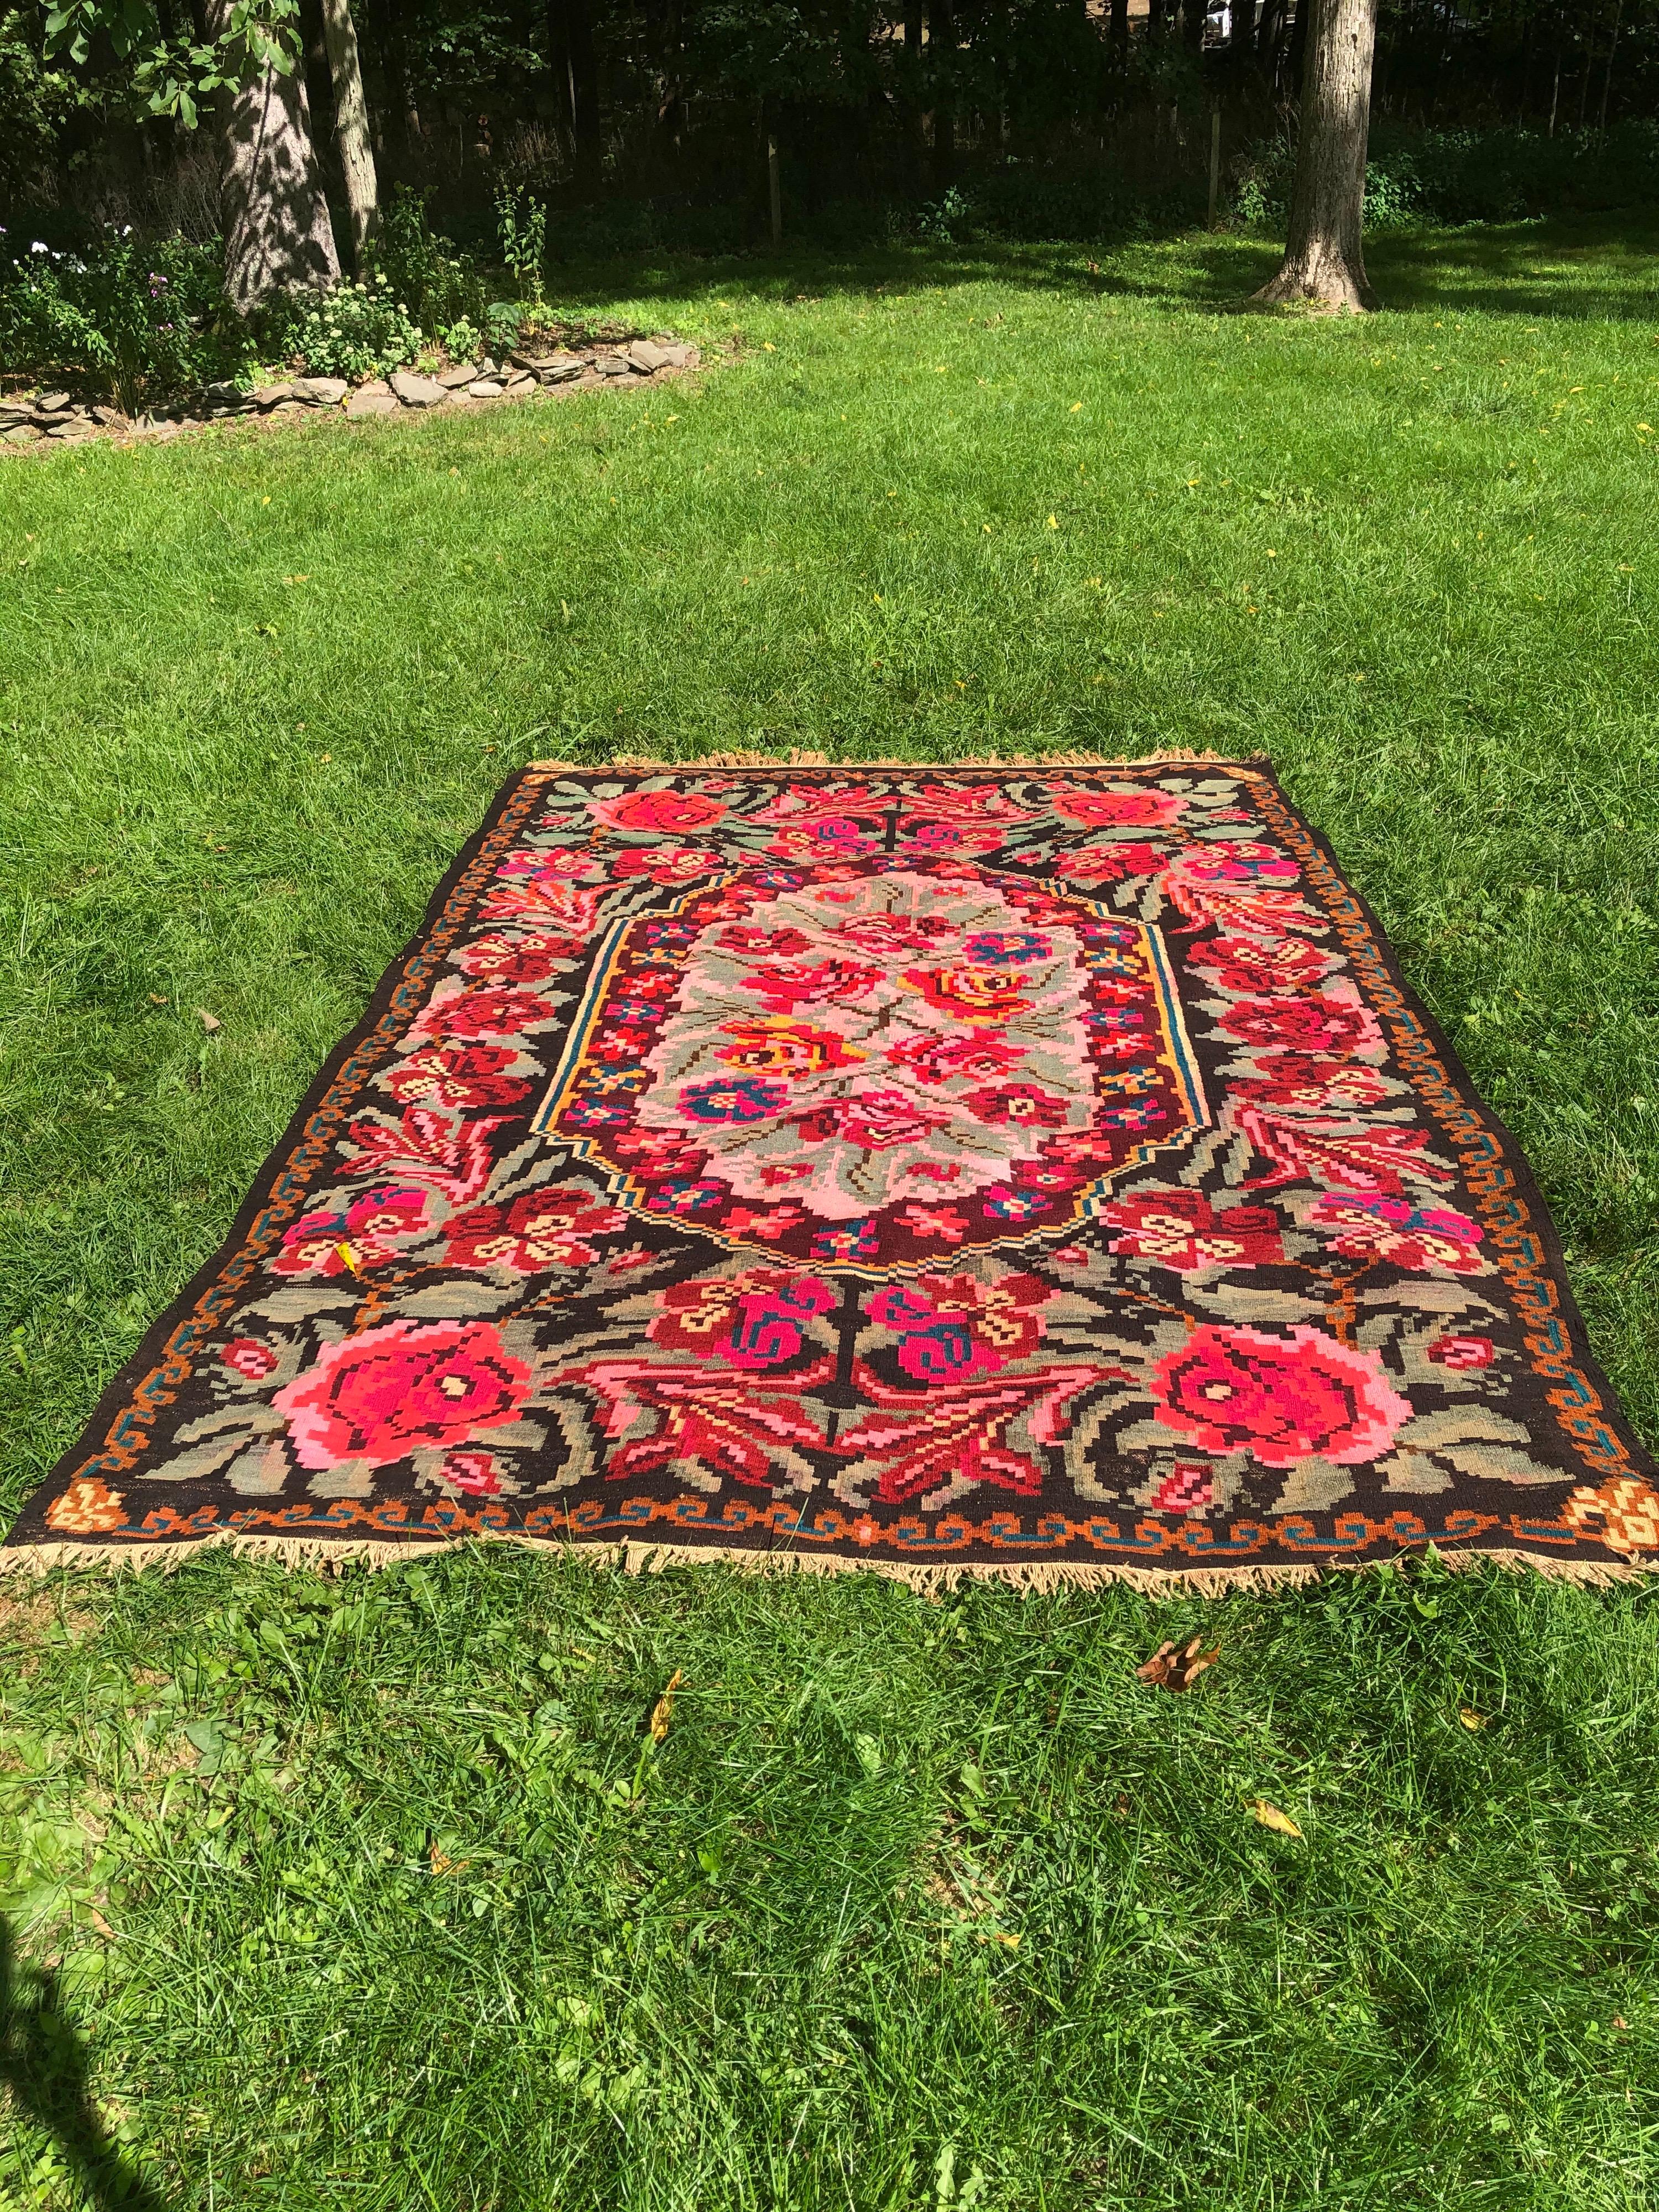 Overblown roses and other flowers adorn this room sized Kilim carpet. Floral medallion in the center. Lovely shades of red, pink and green on a black ground. Fringe in perfect condition. Carpet like new.